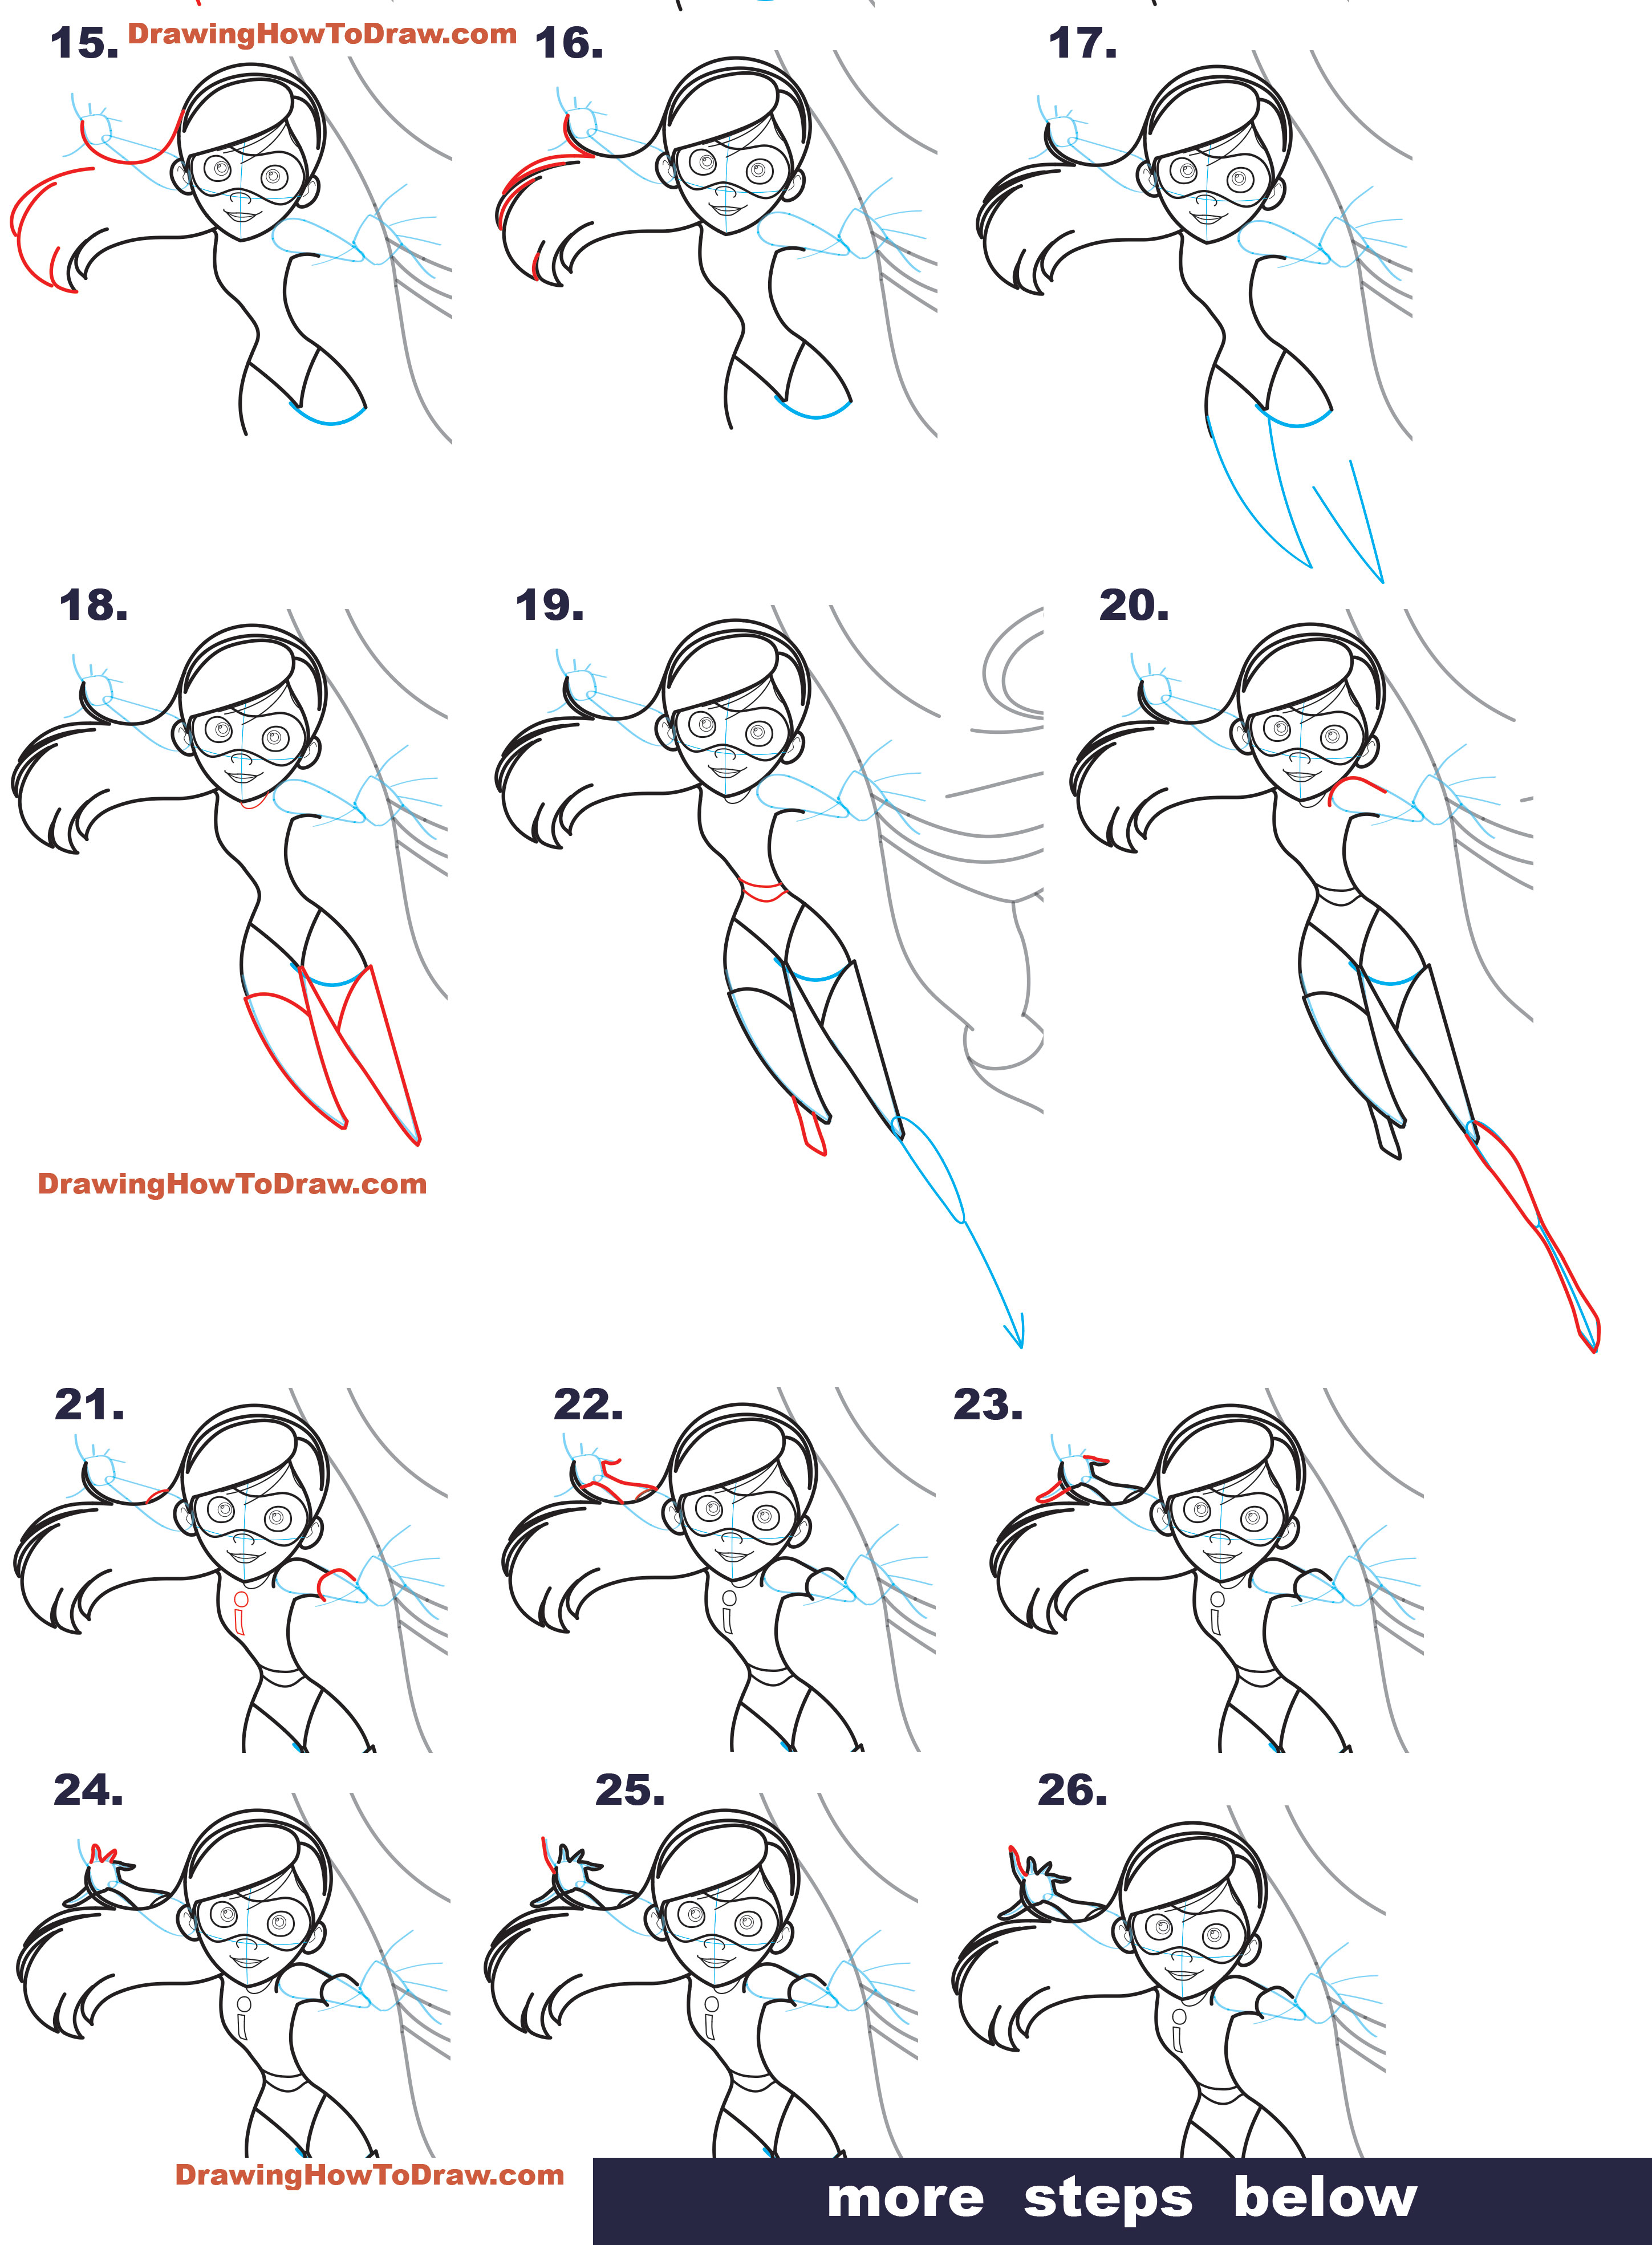 How to Draw Violet, the Daughter, from The Incredibles (Part 3 of Drawing The Incredibles 2 Family) Simple Steps Lesson 